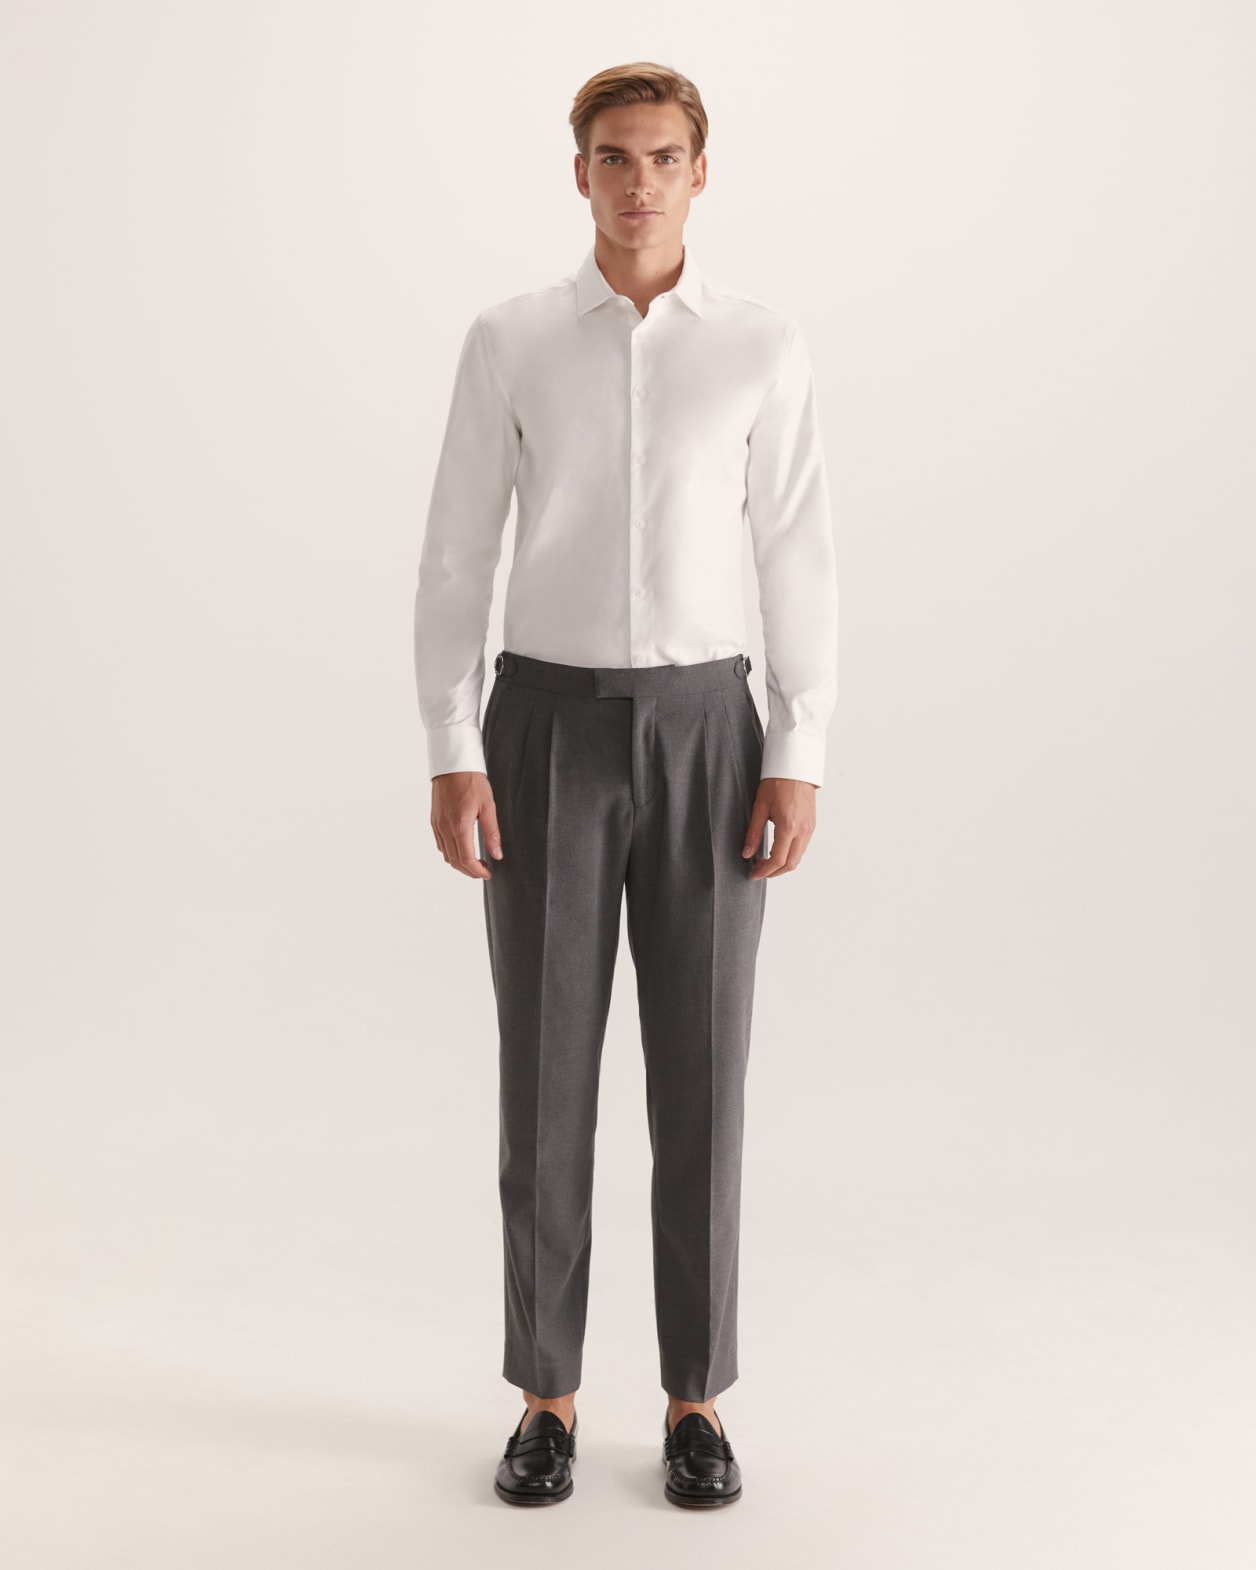 Munroe Easy Care Twill Shirt in WHITE